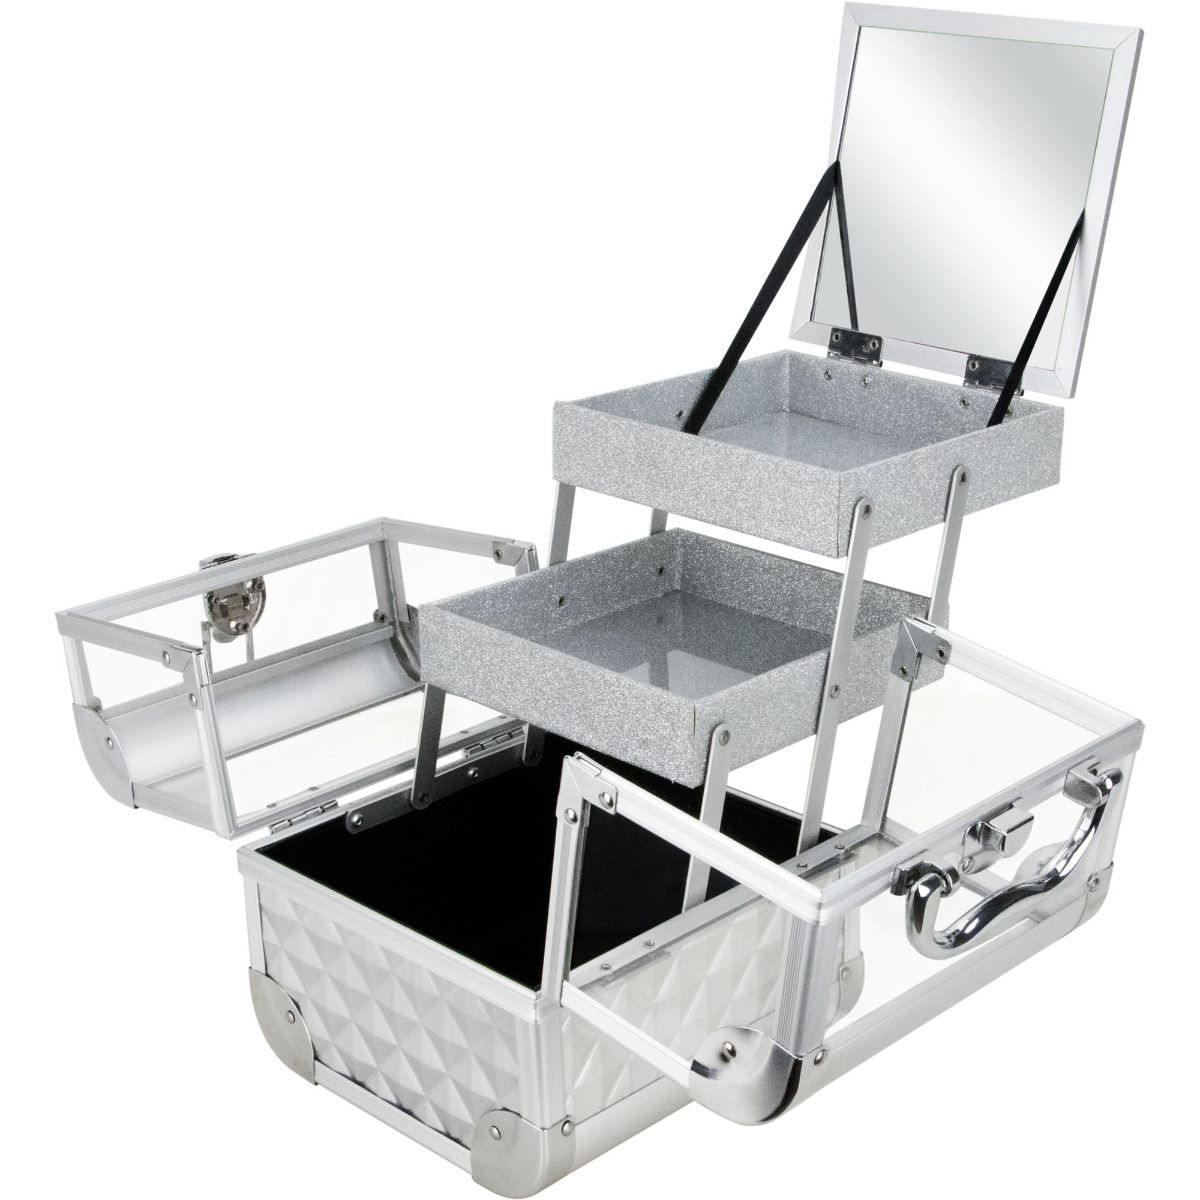 JC Silver Diamond Acrylic 2-Tiers Extendable Trays Cosmetic Train Case with Mirror #JMK001-84